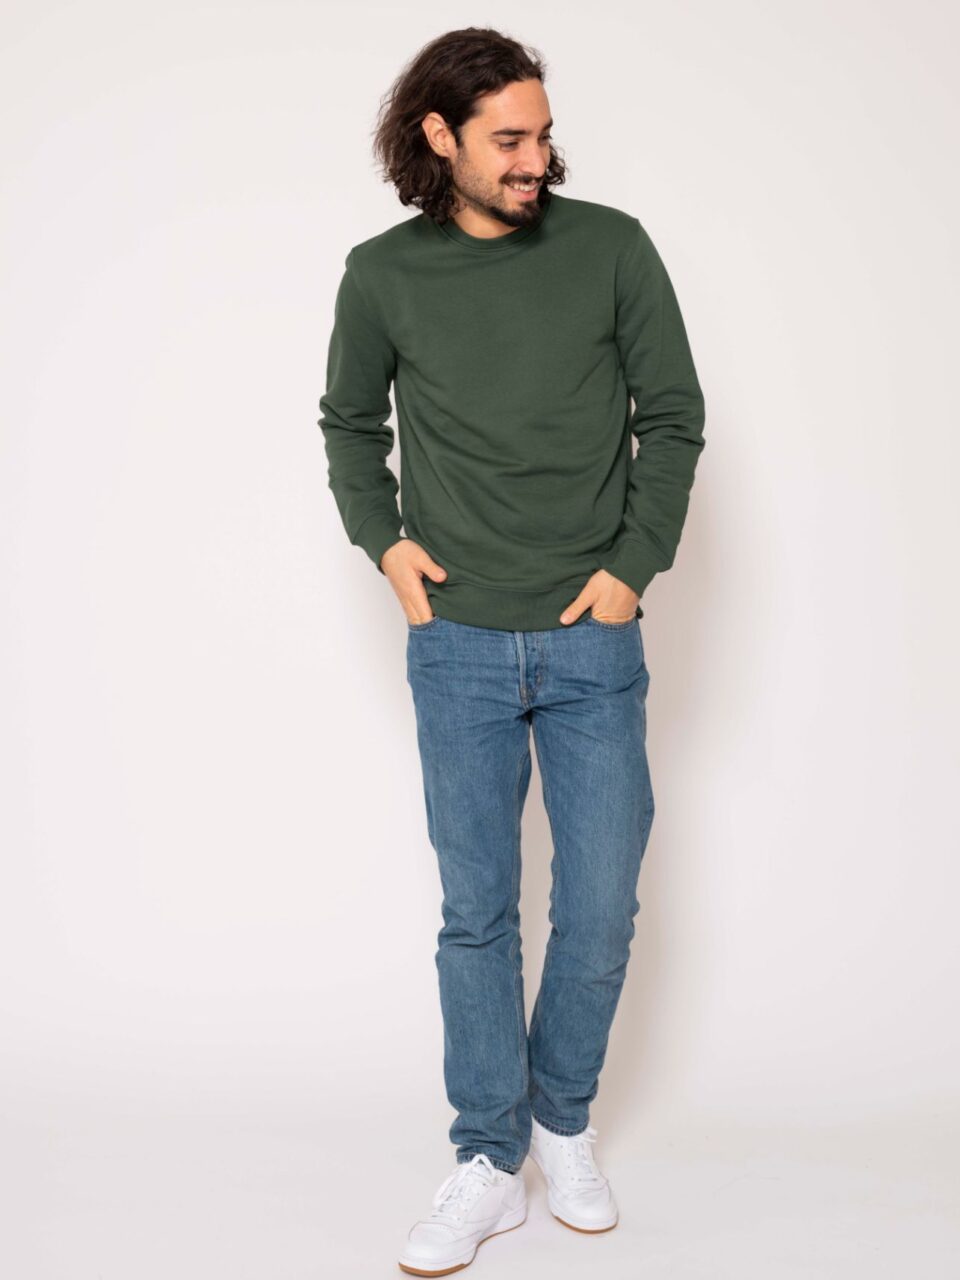 STROM_Forest Green_Sweater